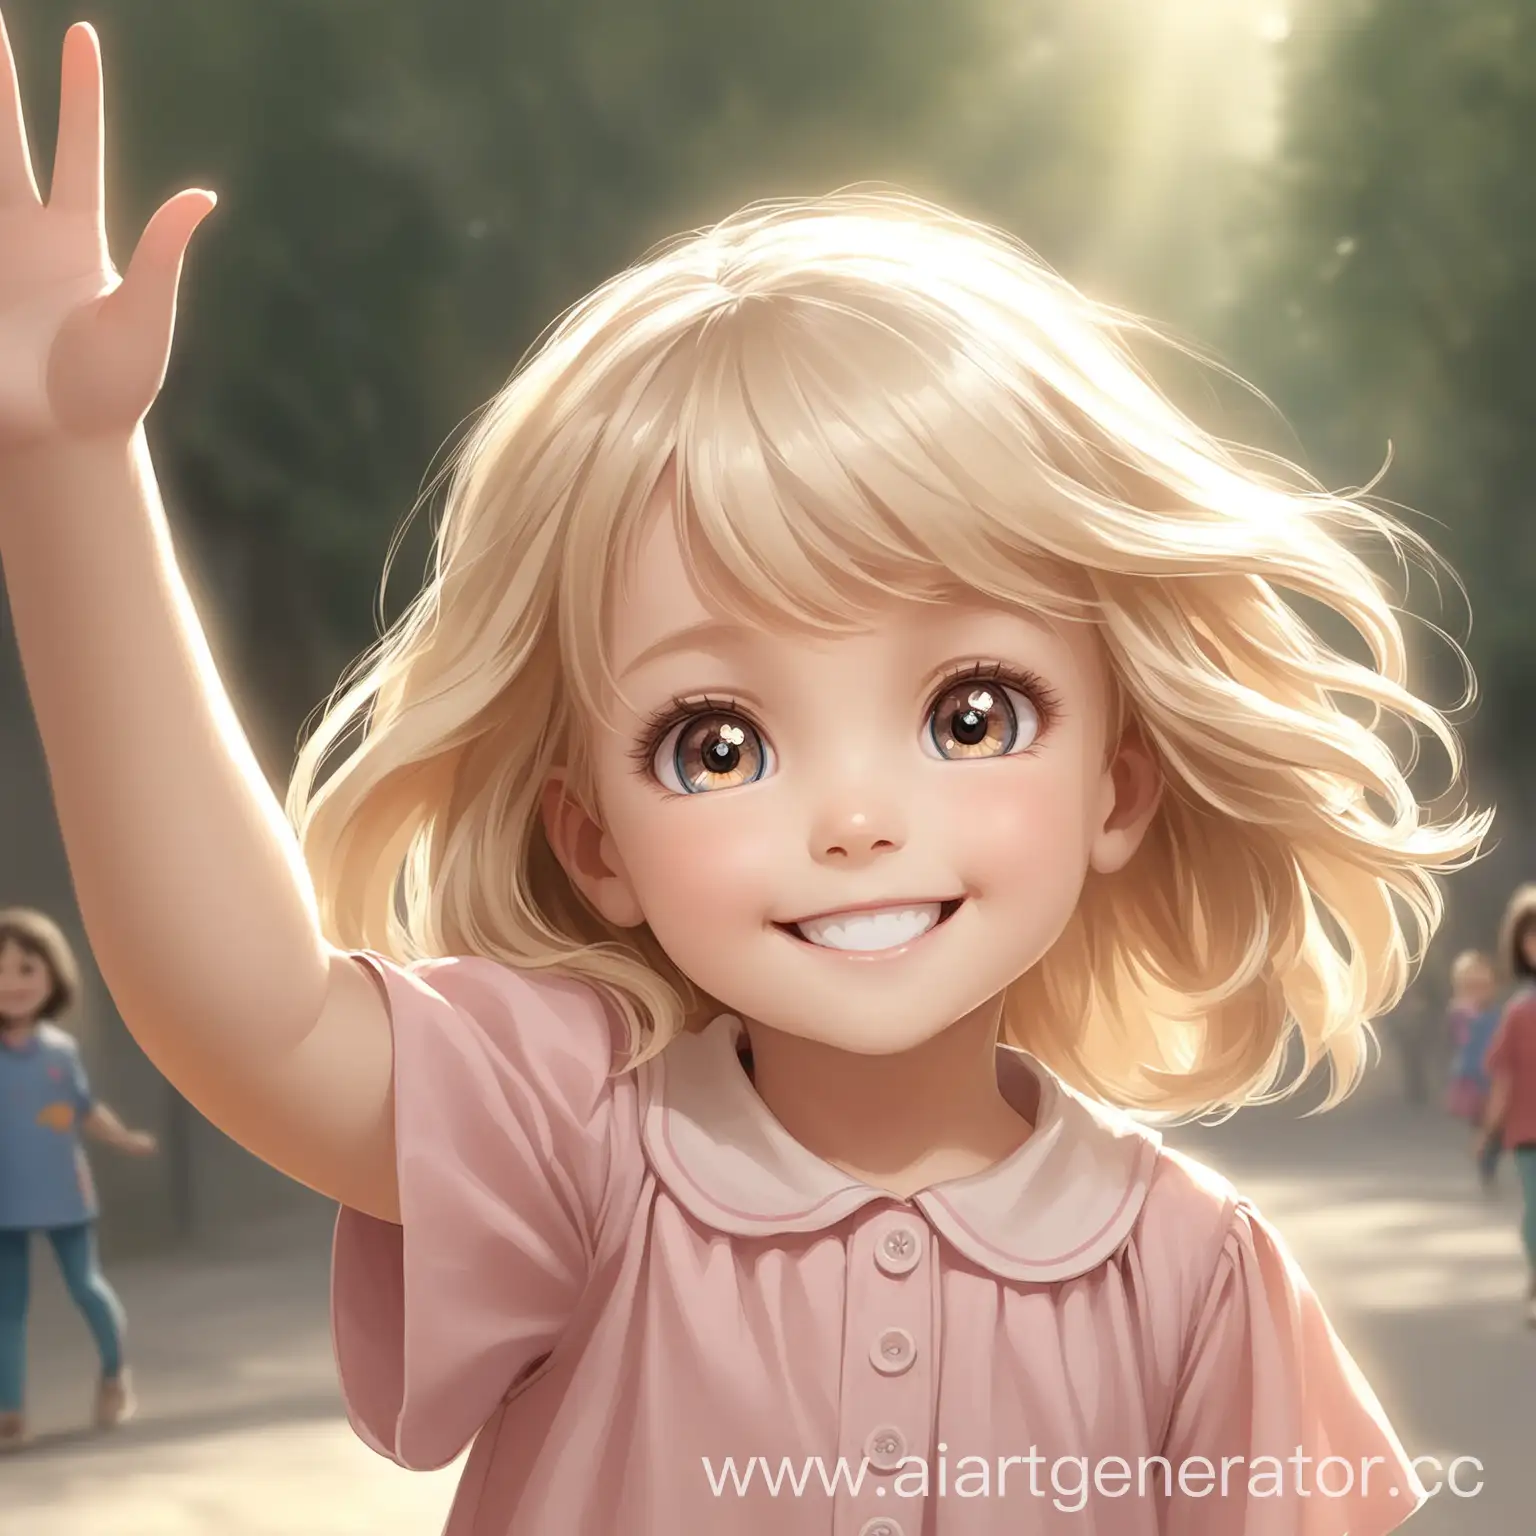 Smiling-Little-Girl-with-Light-Hair-Waving-Cheerfully